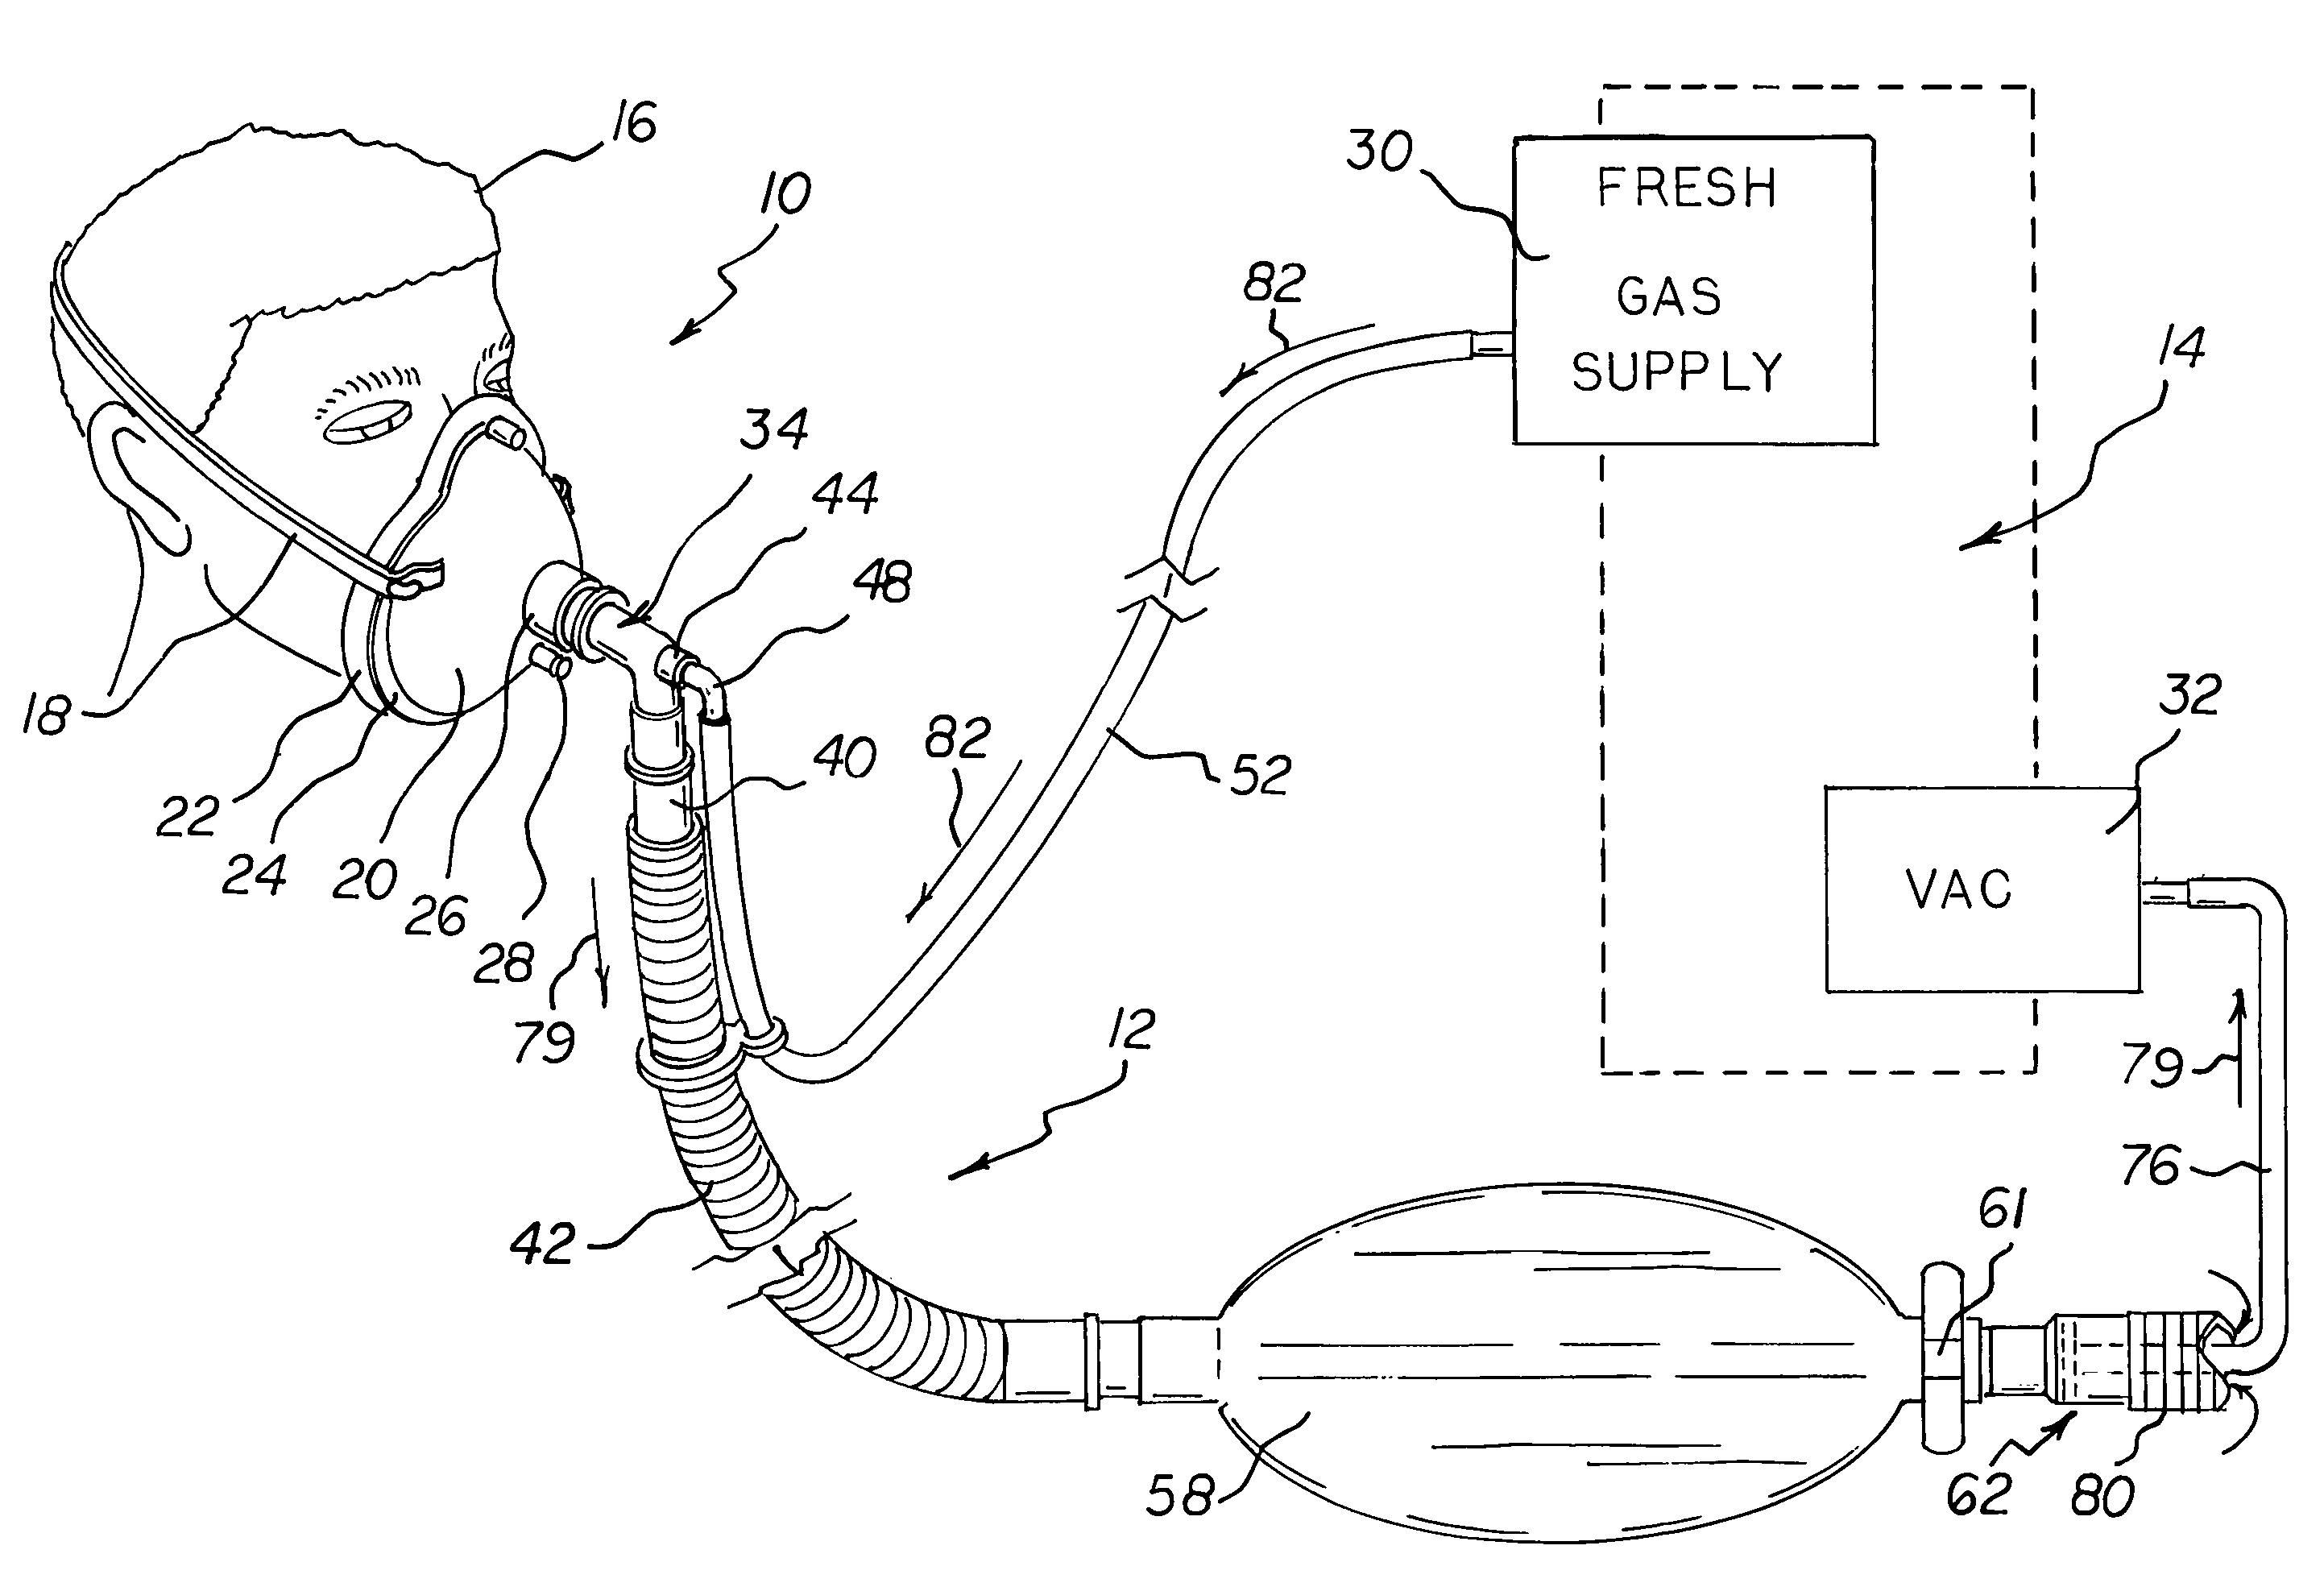 Respiratory face mask and breathing circuit assembly